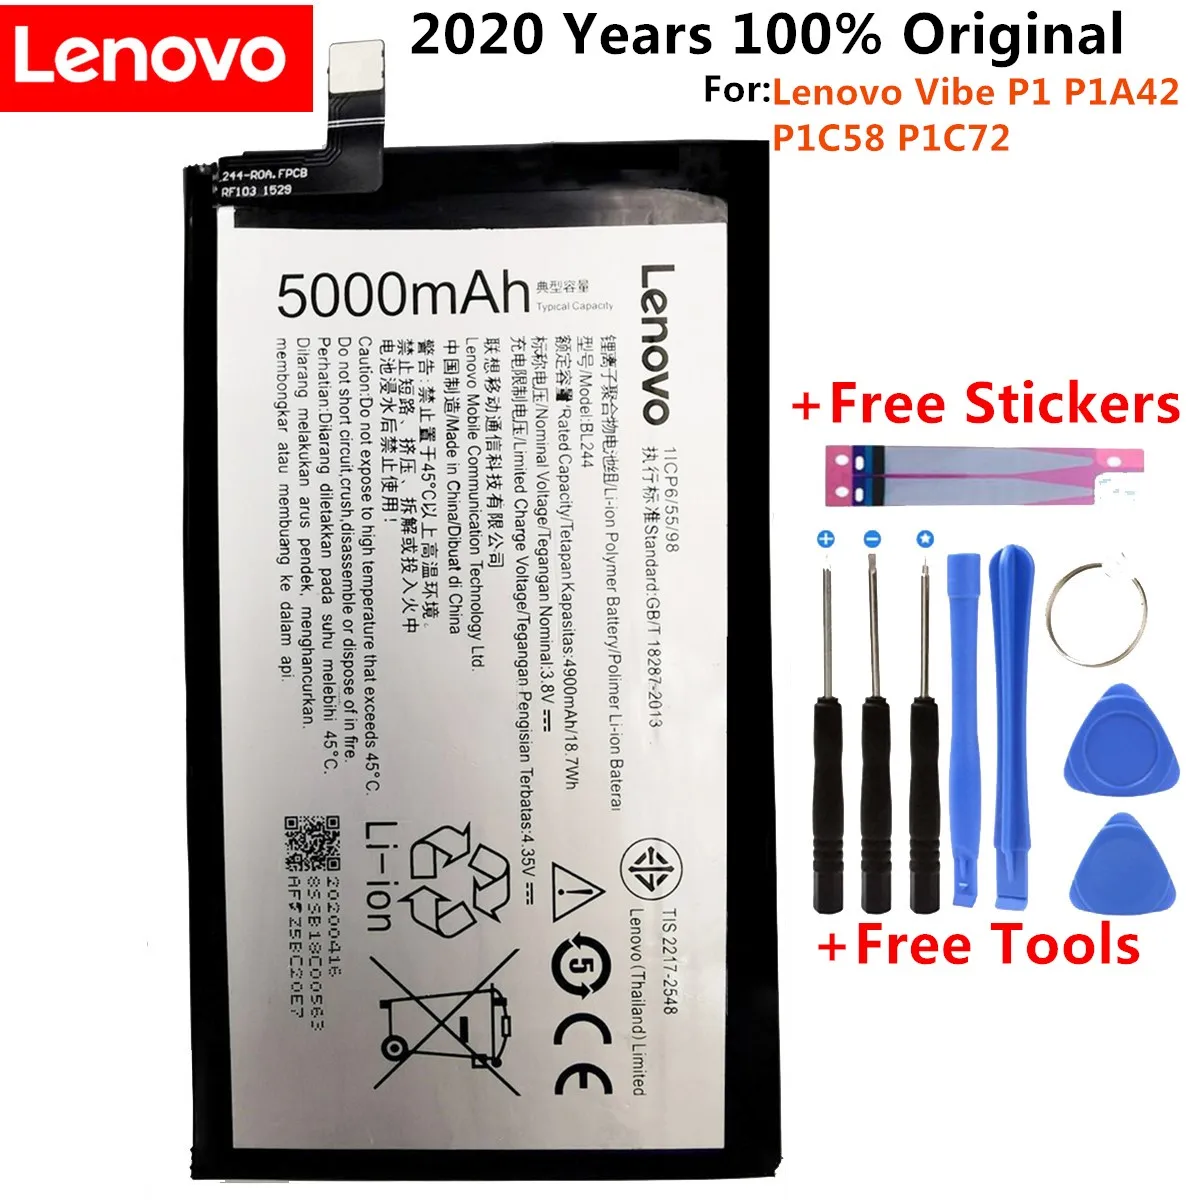 100% Original New High quality Real 5000mAh BL244 battery Batterie for Lenovo Vibe P1 P1A42 P1C58 P1C72 +Gift Tools +Stickers